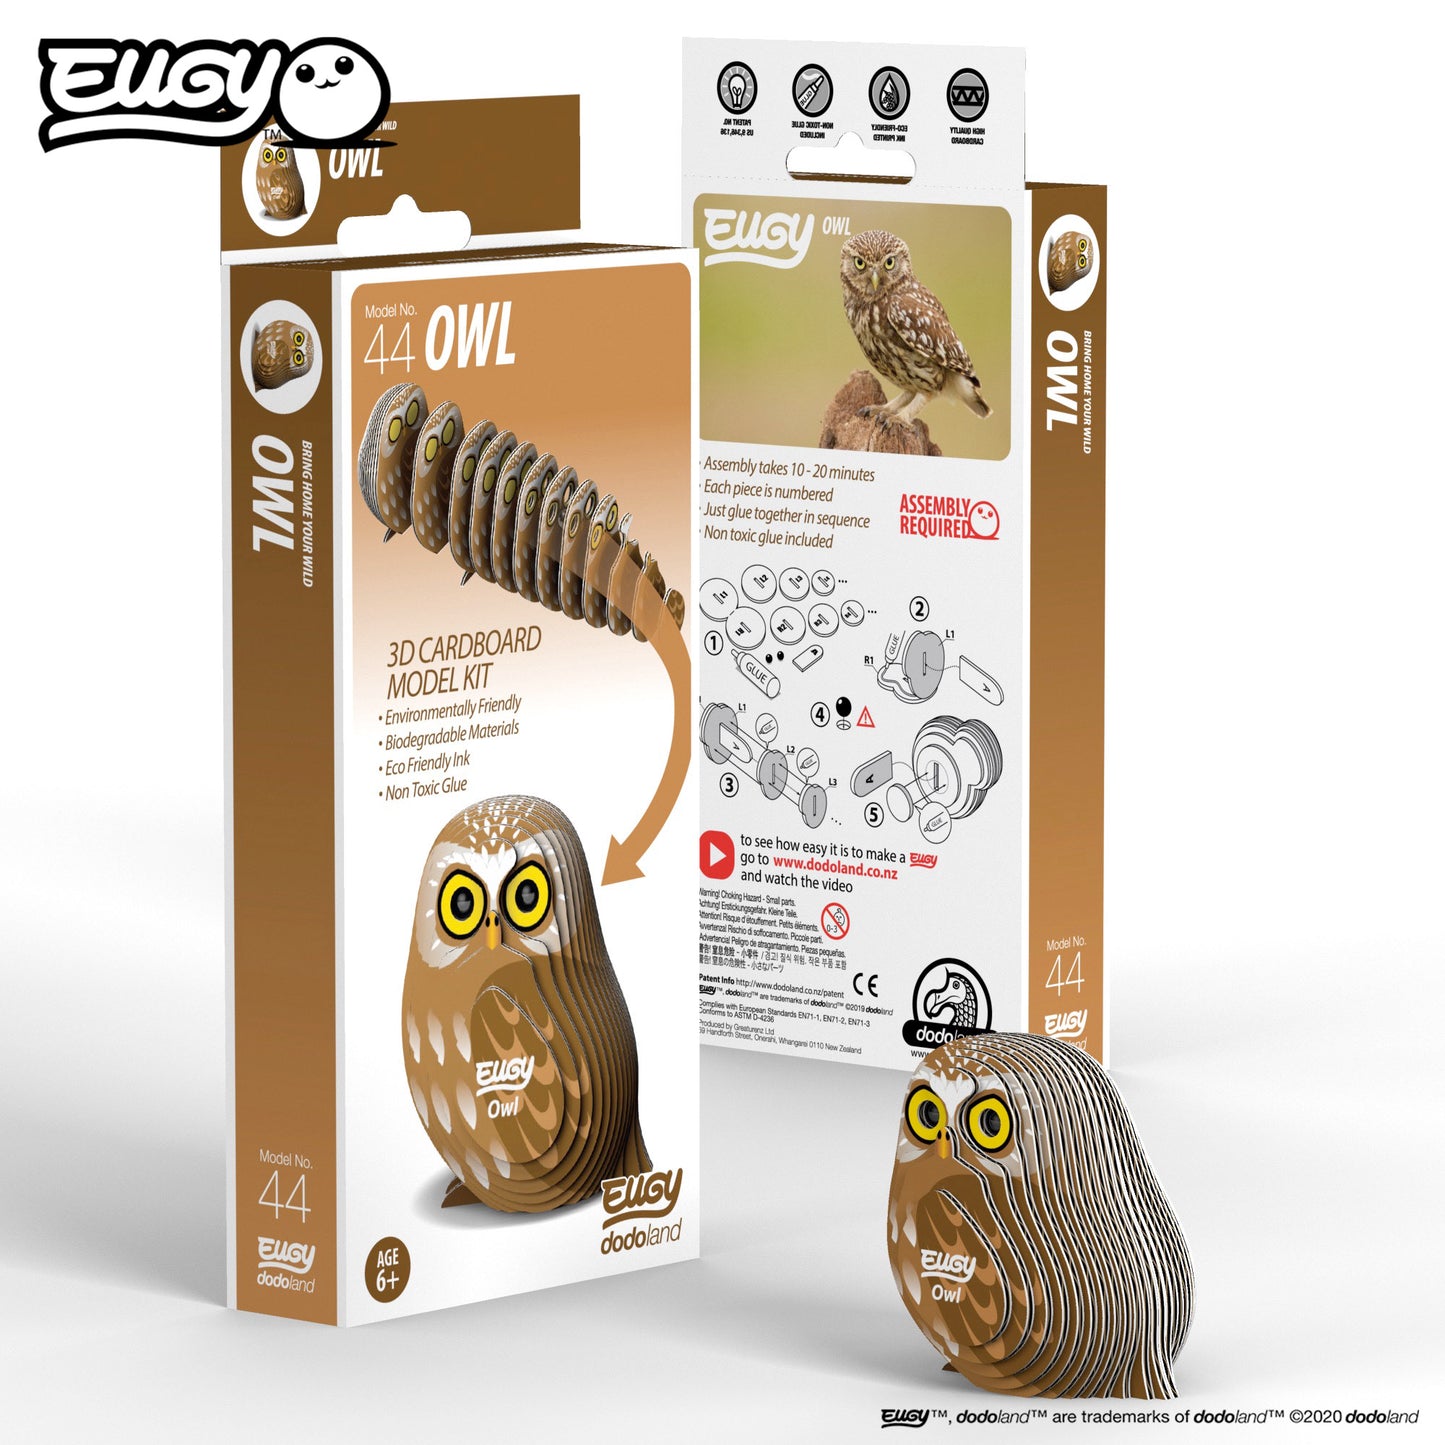 Unleash Wisdom and Creativity with an Owl 3D Puzzle by Eugy - 3D OWL ( 044 )